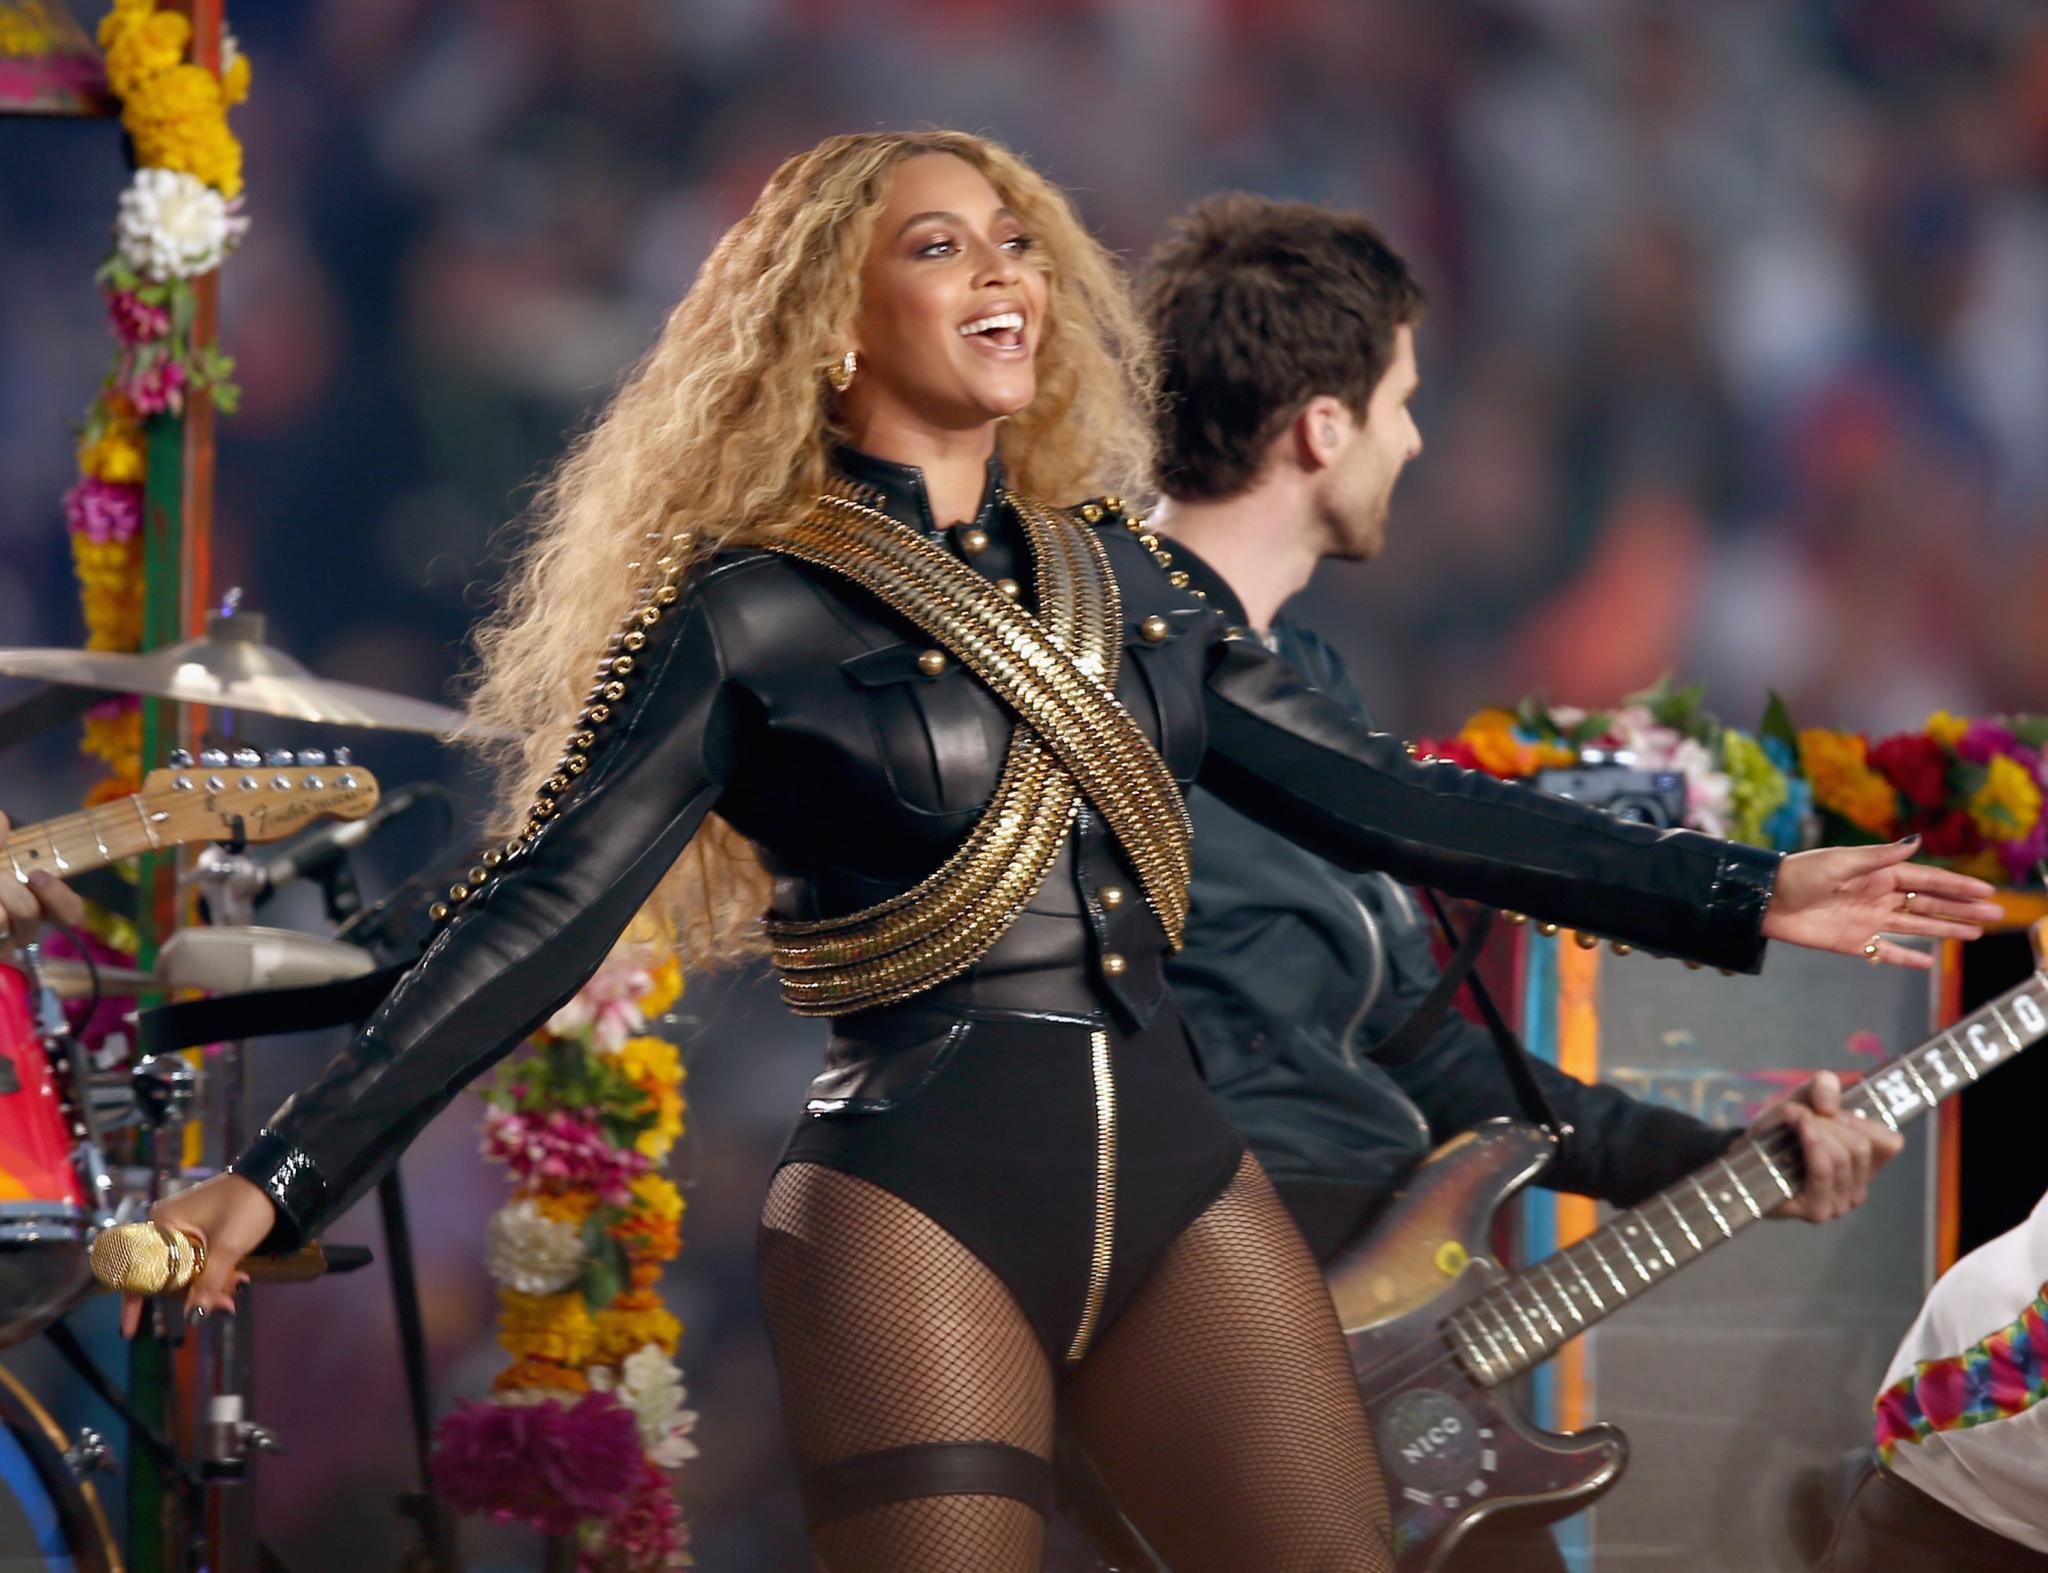 EXCLUSIVE: Beyonce’s Stylist Spills Tea on Michael Jackson Tribute During Super Bowl Performance